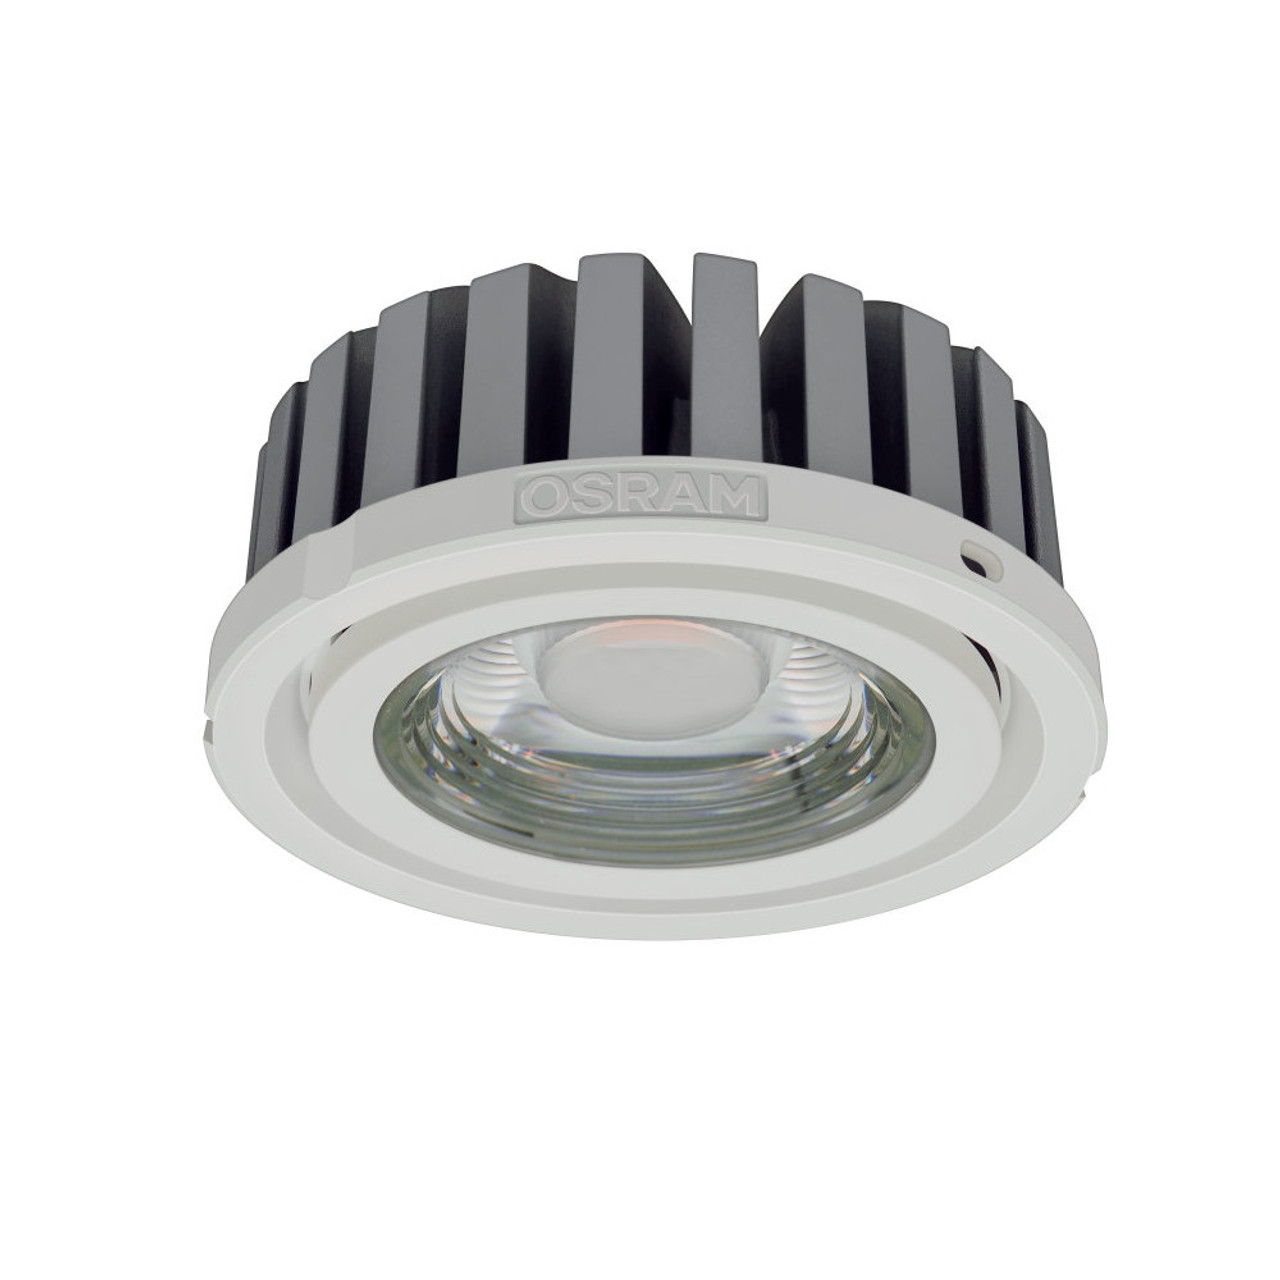 LED 700mA Constant Current 25.1W Dimmable 2700K CRi90 2050lm 40 degrees COB